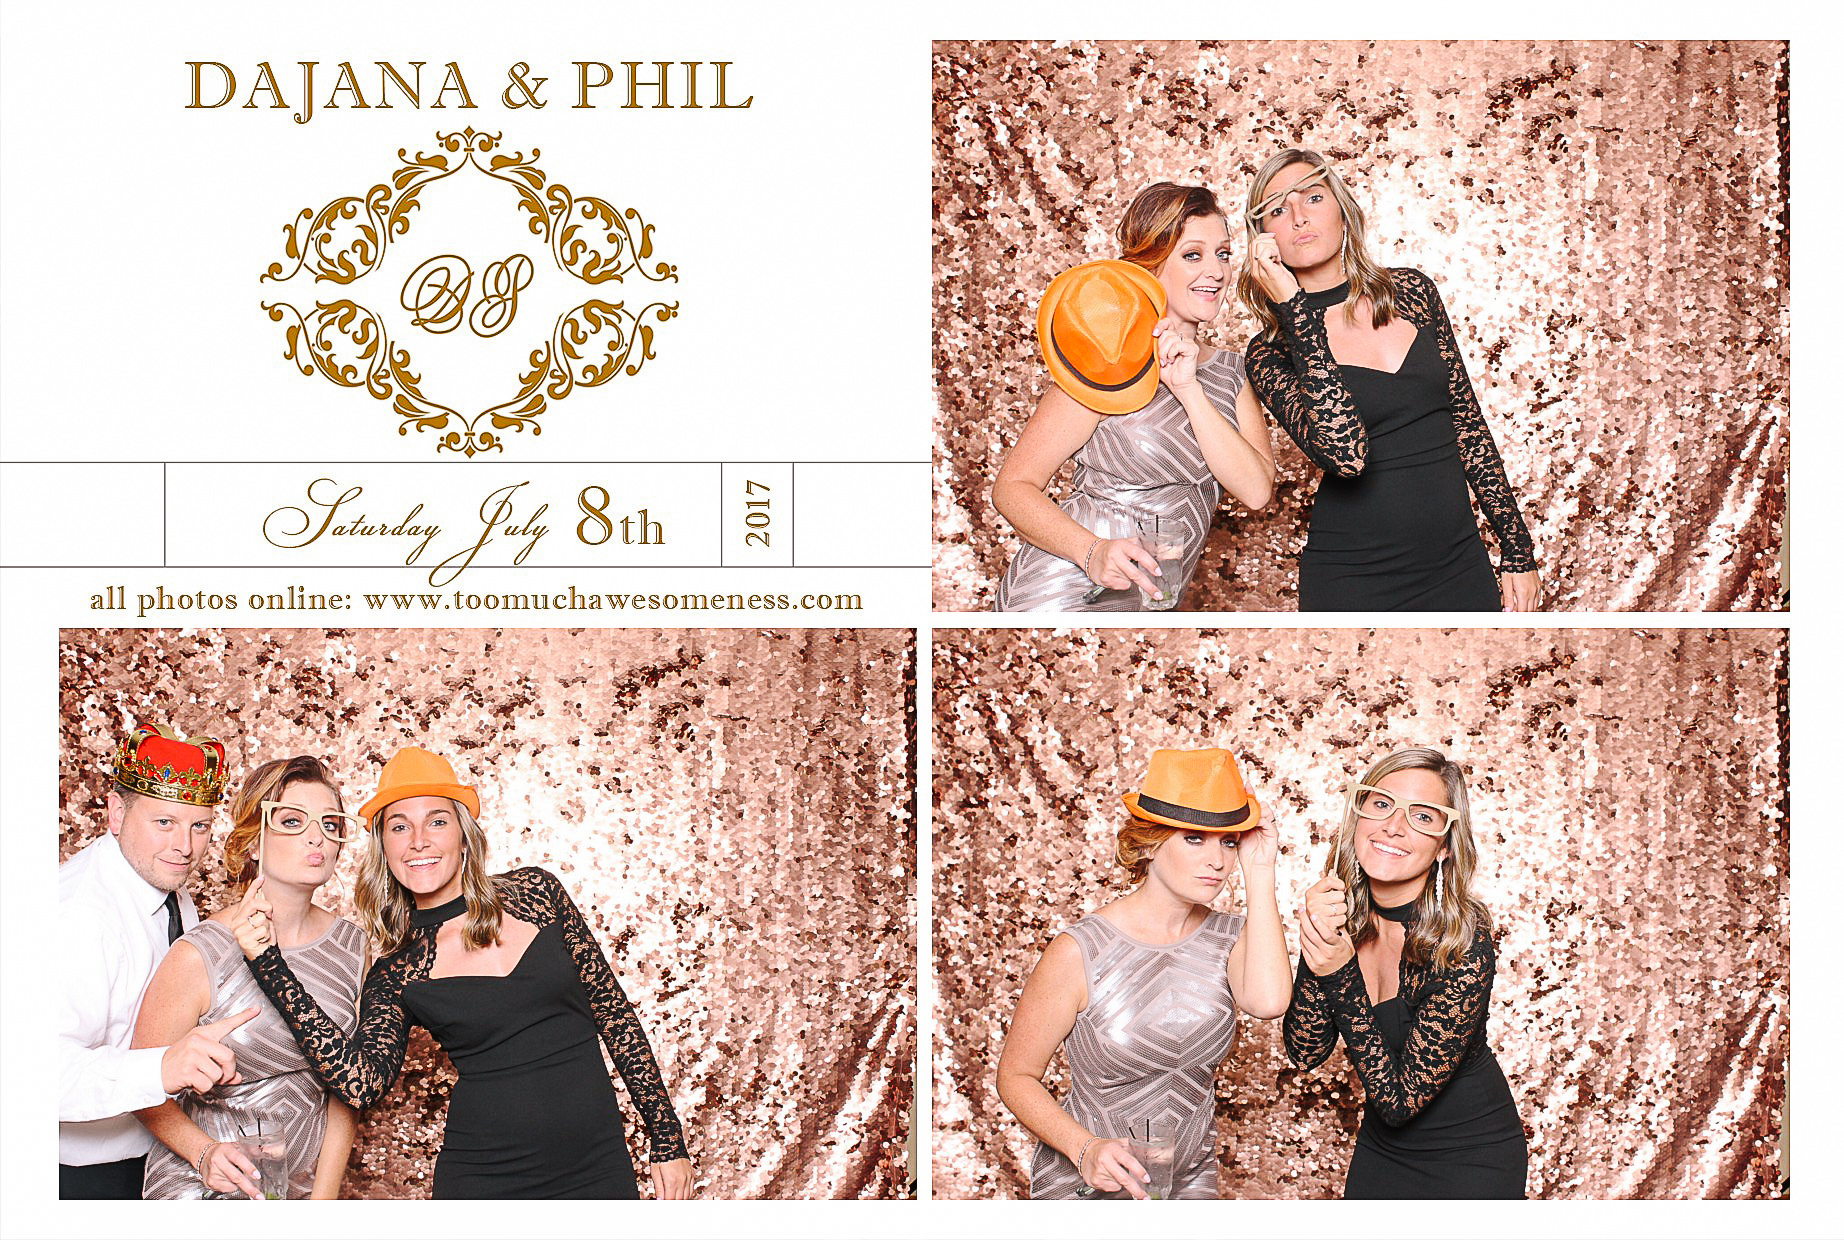 00420 Dajana and Phil Taylor Wedding Photos photobooth by too much awesomeness.jpg